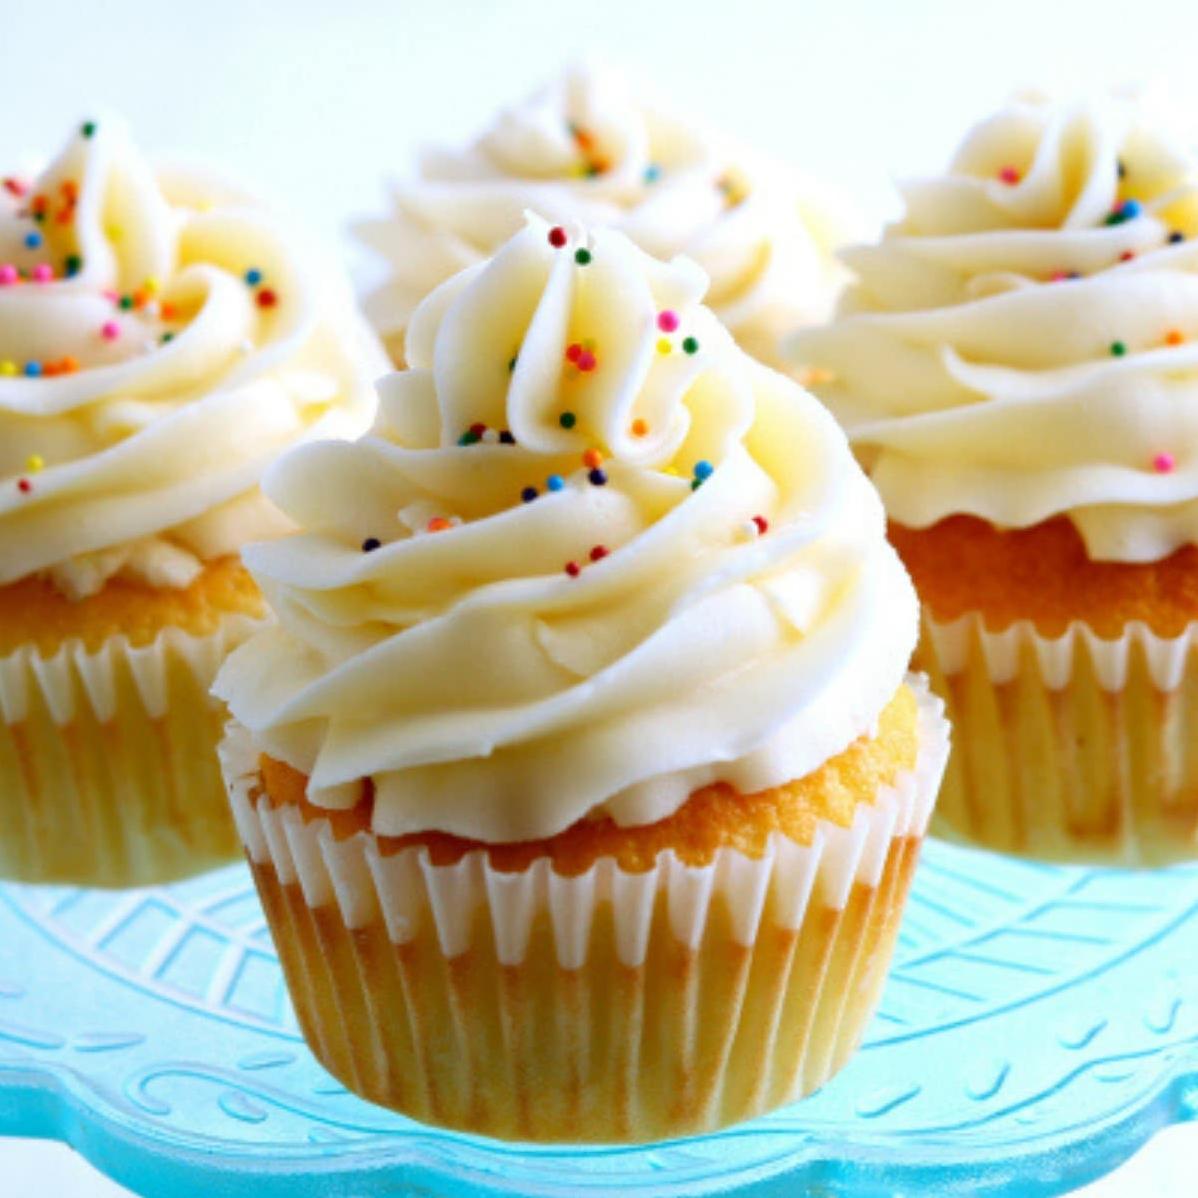  These cupcakes are so delicious no one will believe they're dairy-free!